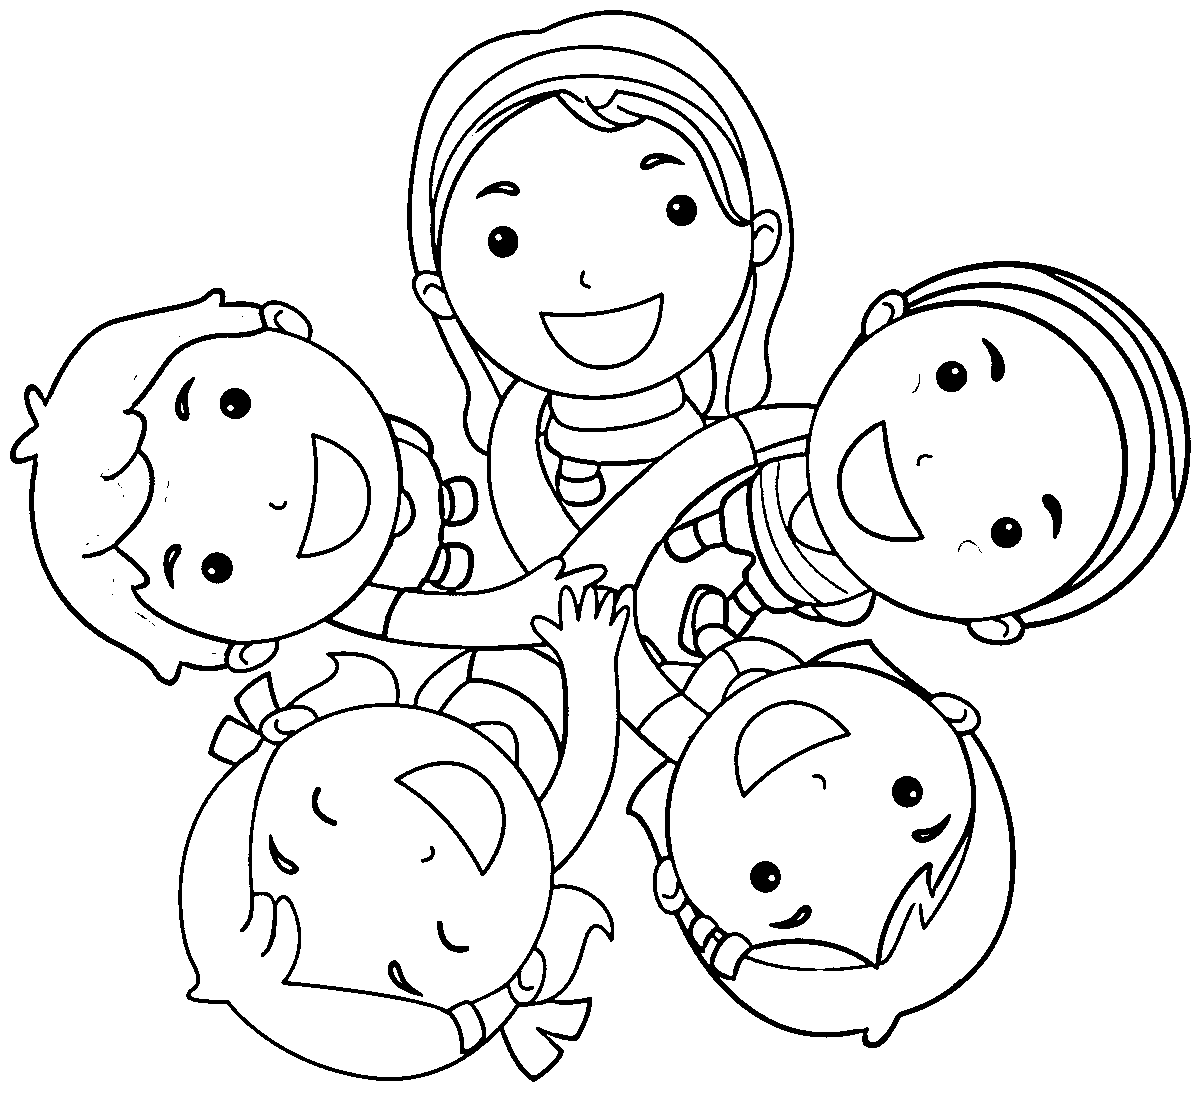 Friendship Coloring Pages To Download And Print For Free